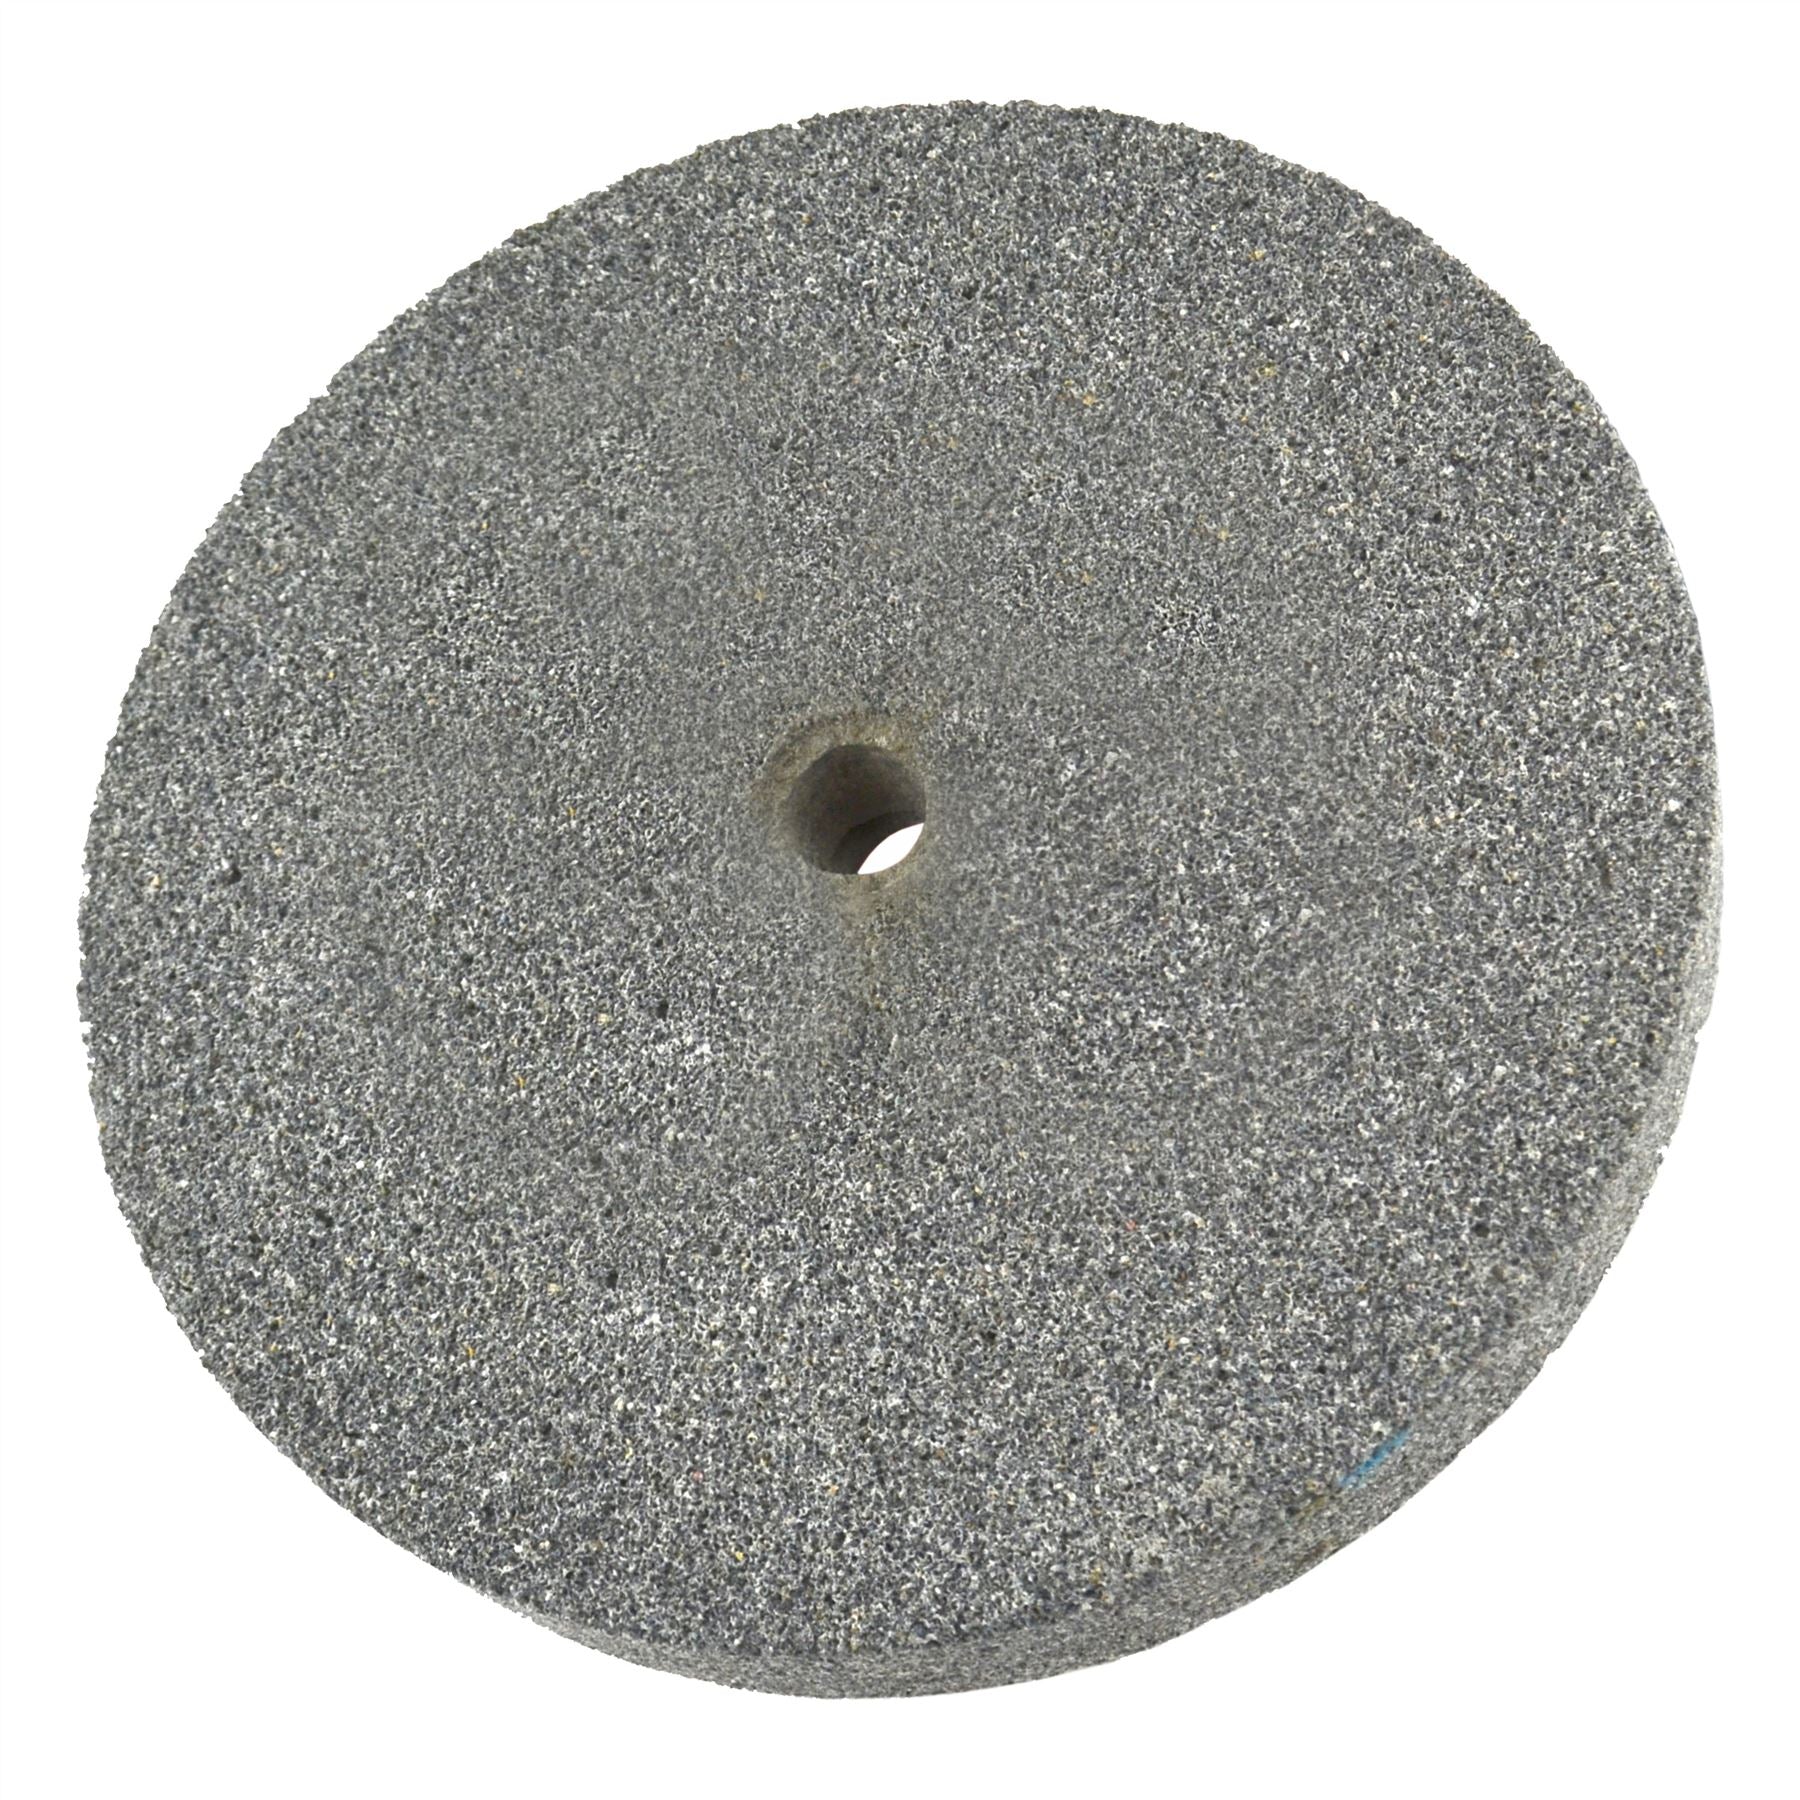 6" (150mm) Fine Grinding Wheel Bench Grinder Stone 60 Grit 19mm Thick TE877